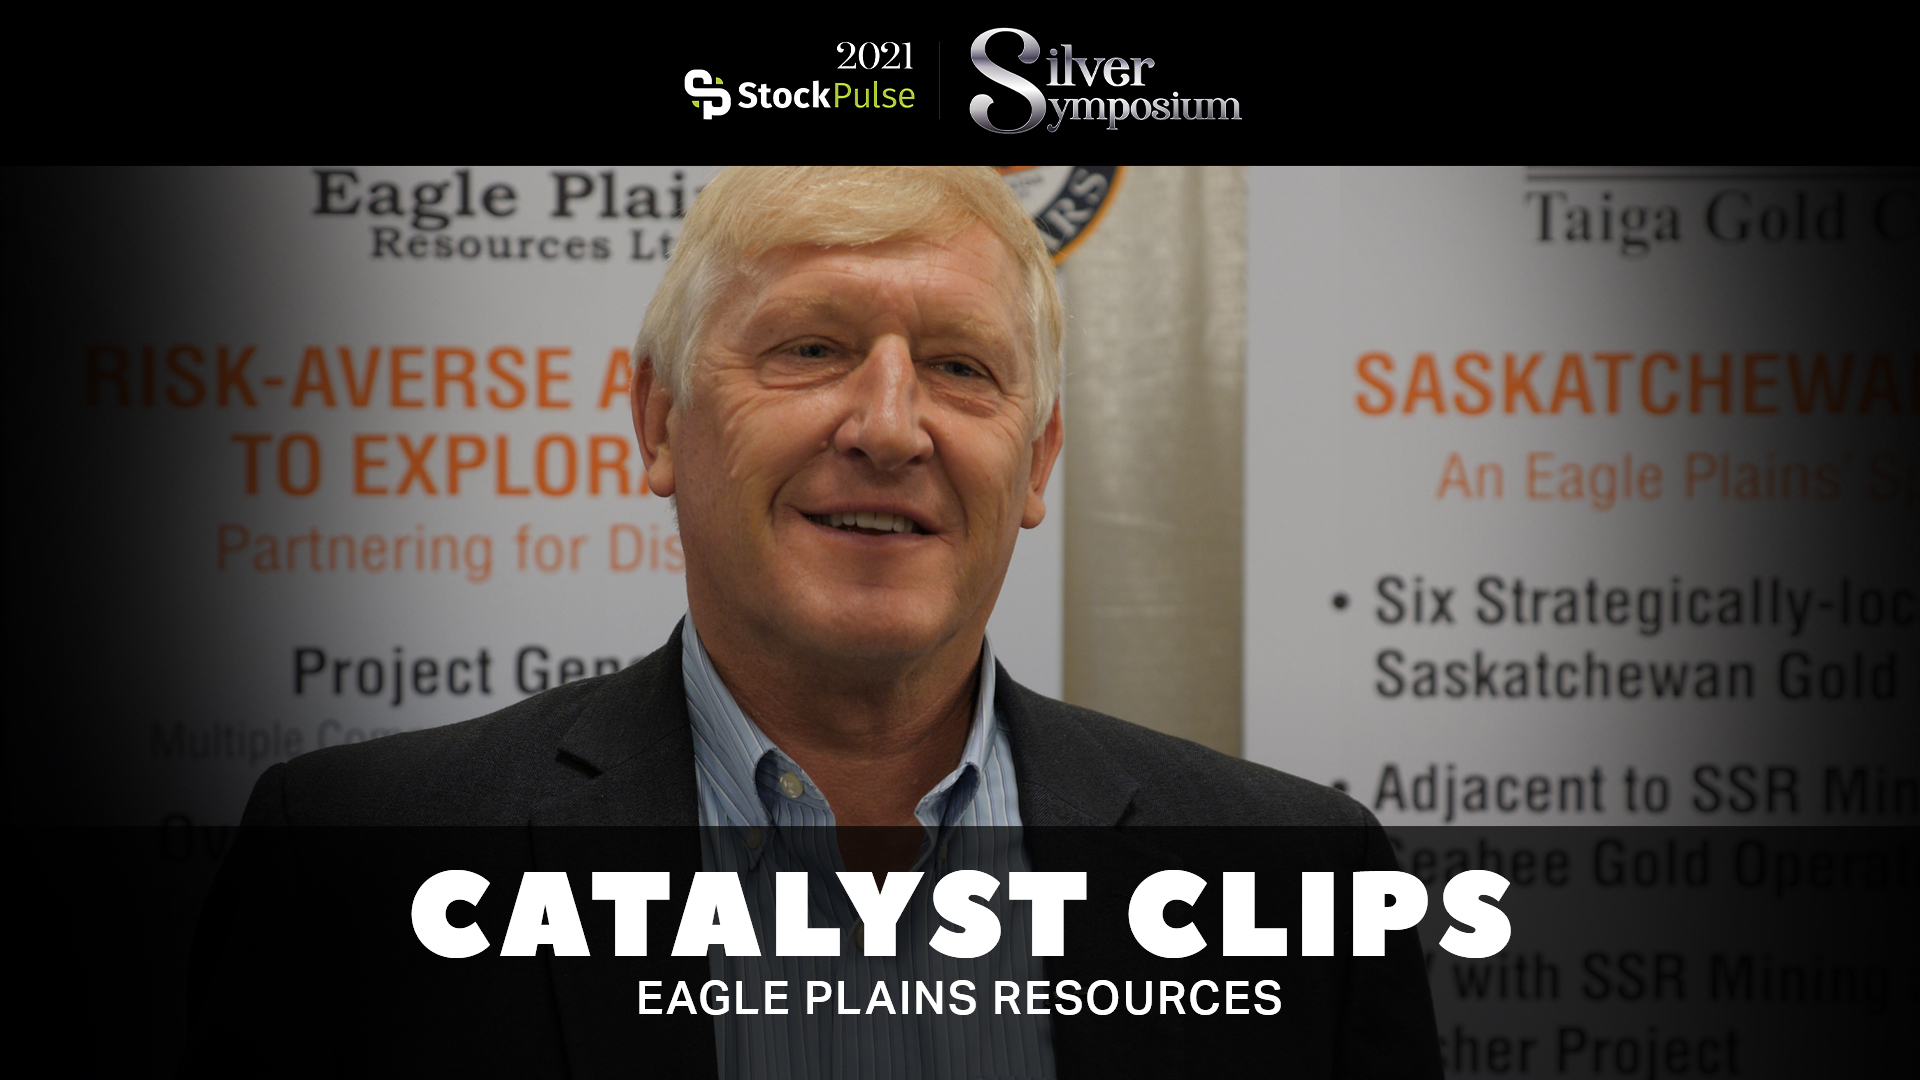 2021 StockPulse Silver Symposium Catalyst Clips | Tim Termuende of Eagle Plains Resources